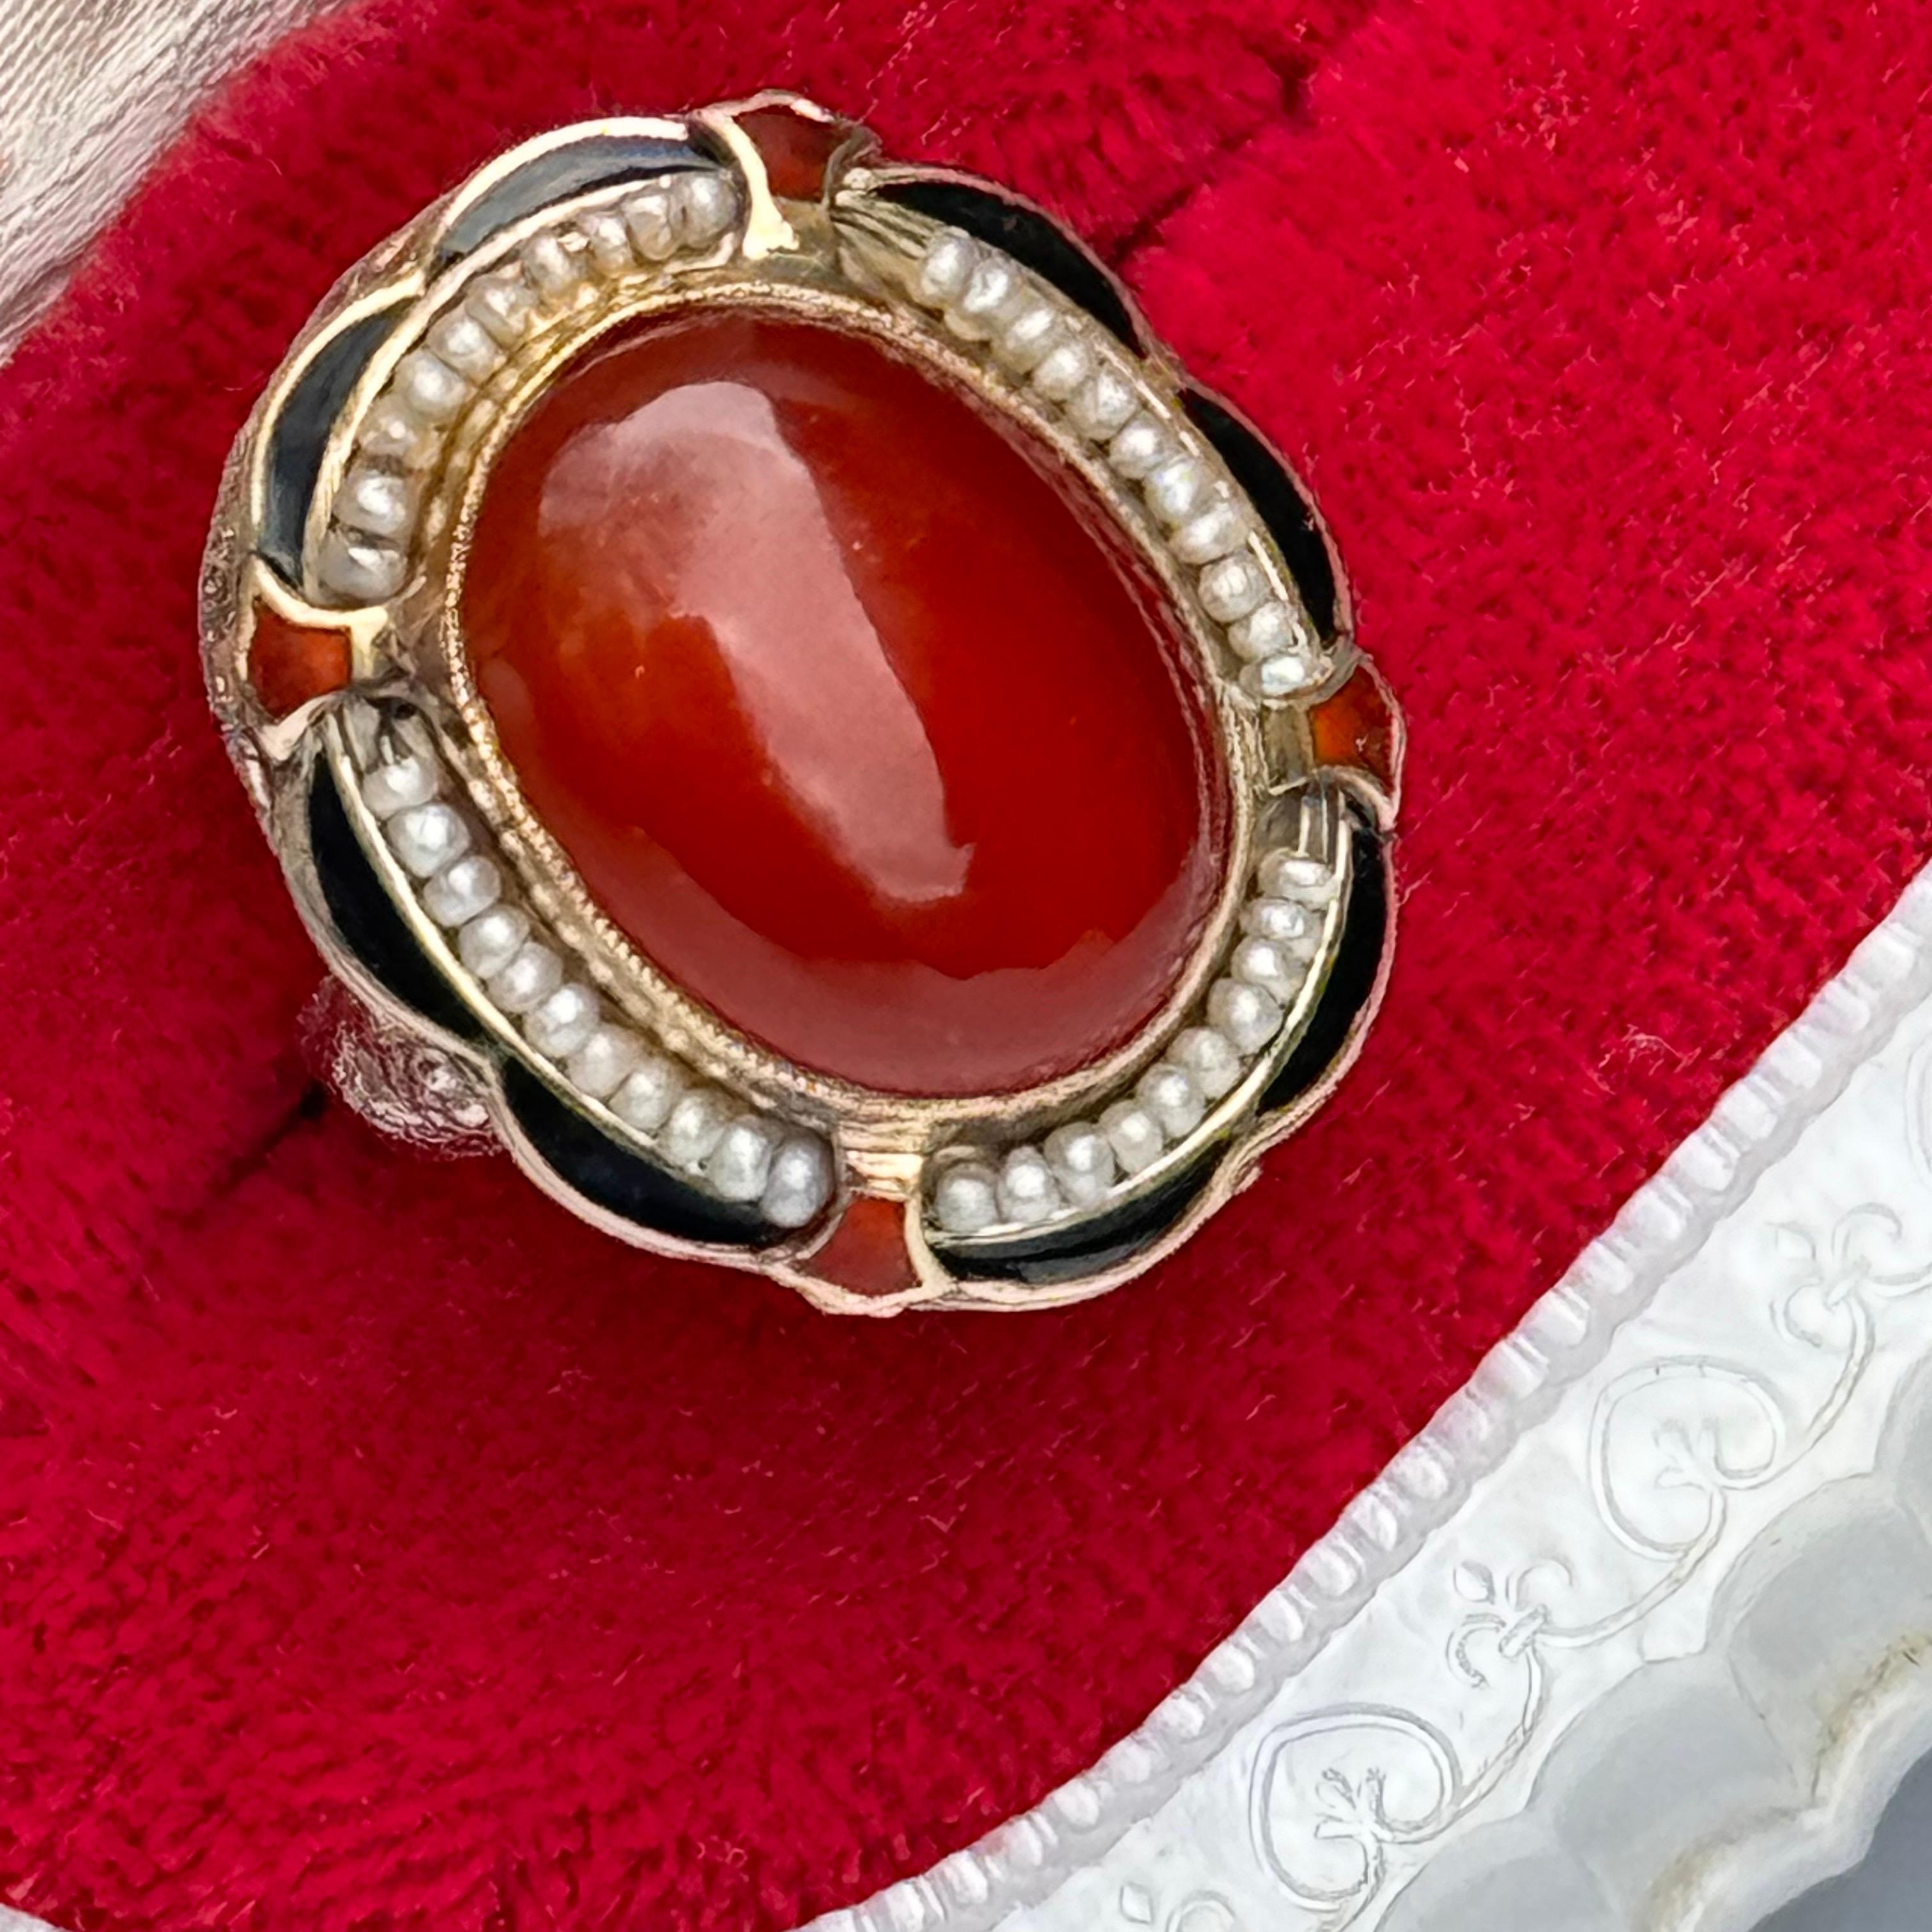 The Art Deco Gold Enamel Ring is a vintage piece featuring intricate filigree work in 14kt white and yellow gold. It showcases a stunning carnelian gemstone accented by delicate seed pearls. Enamel detailing adds vibrant color and depth to the